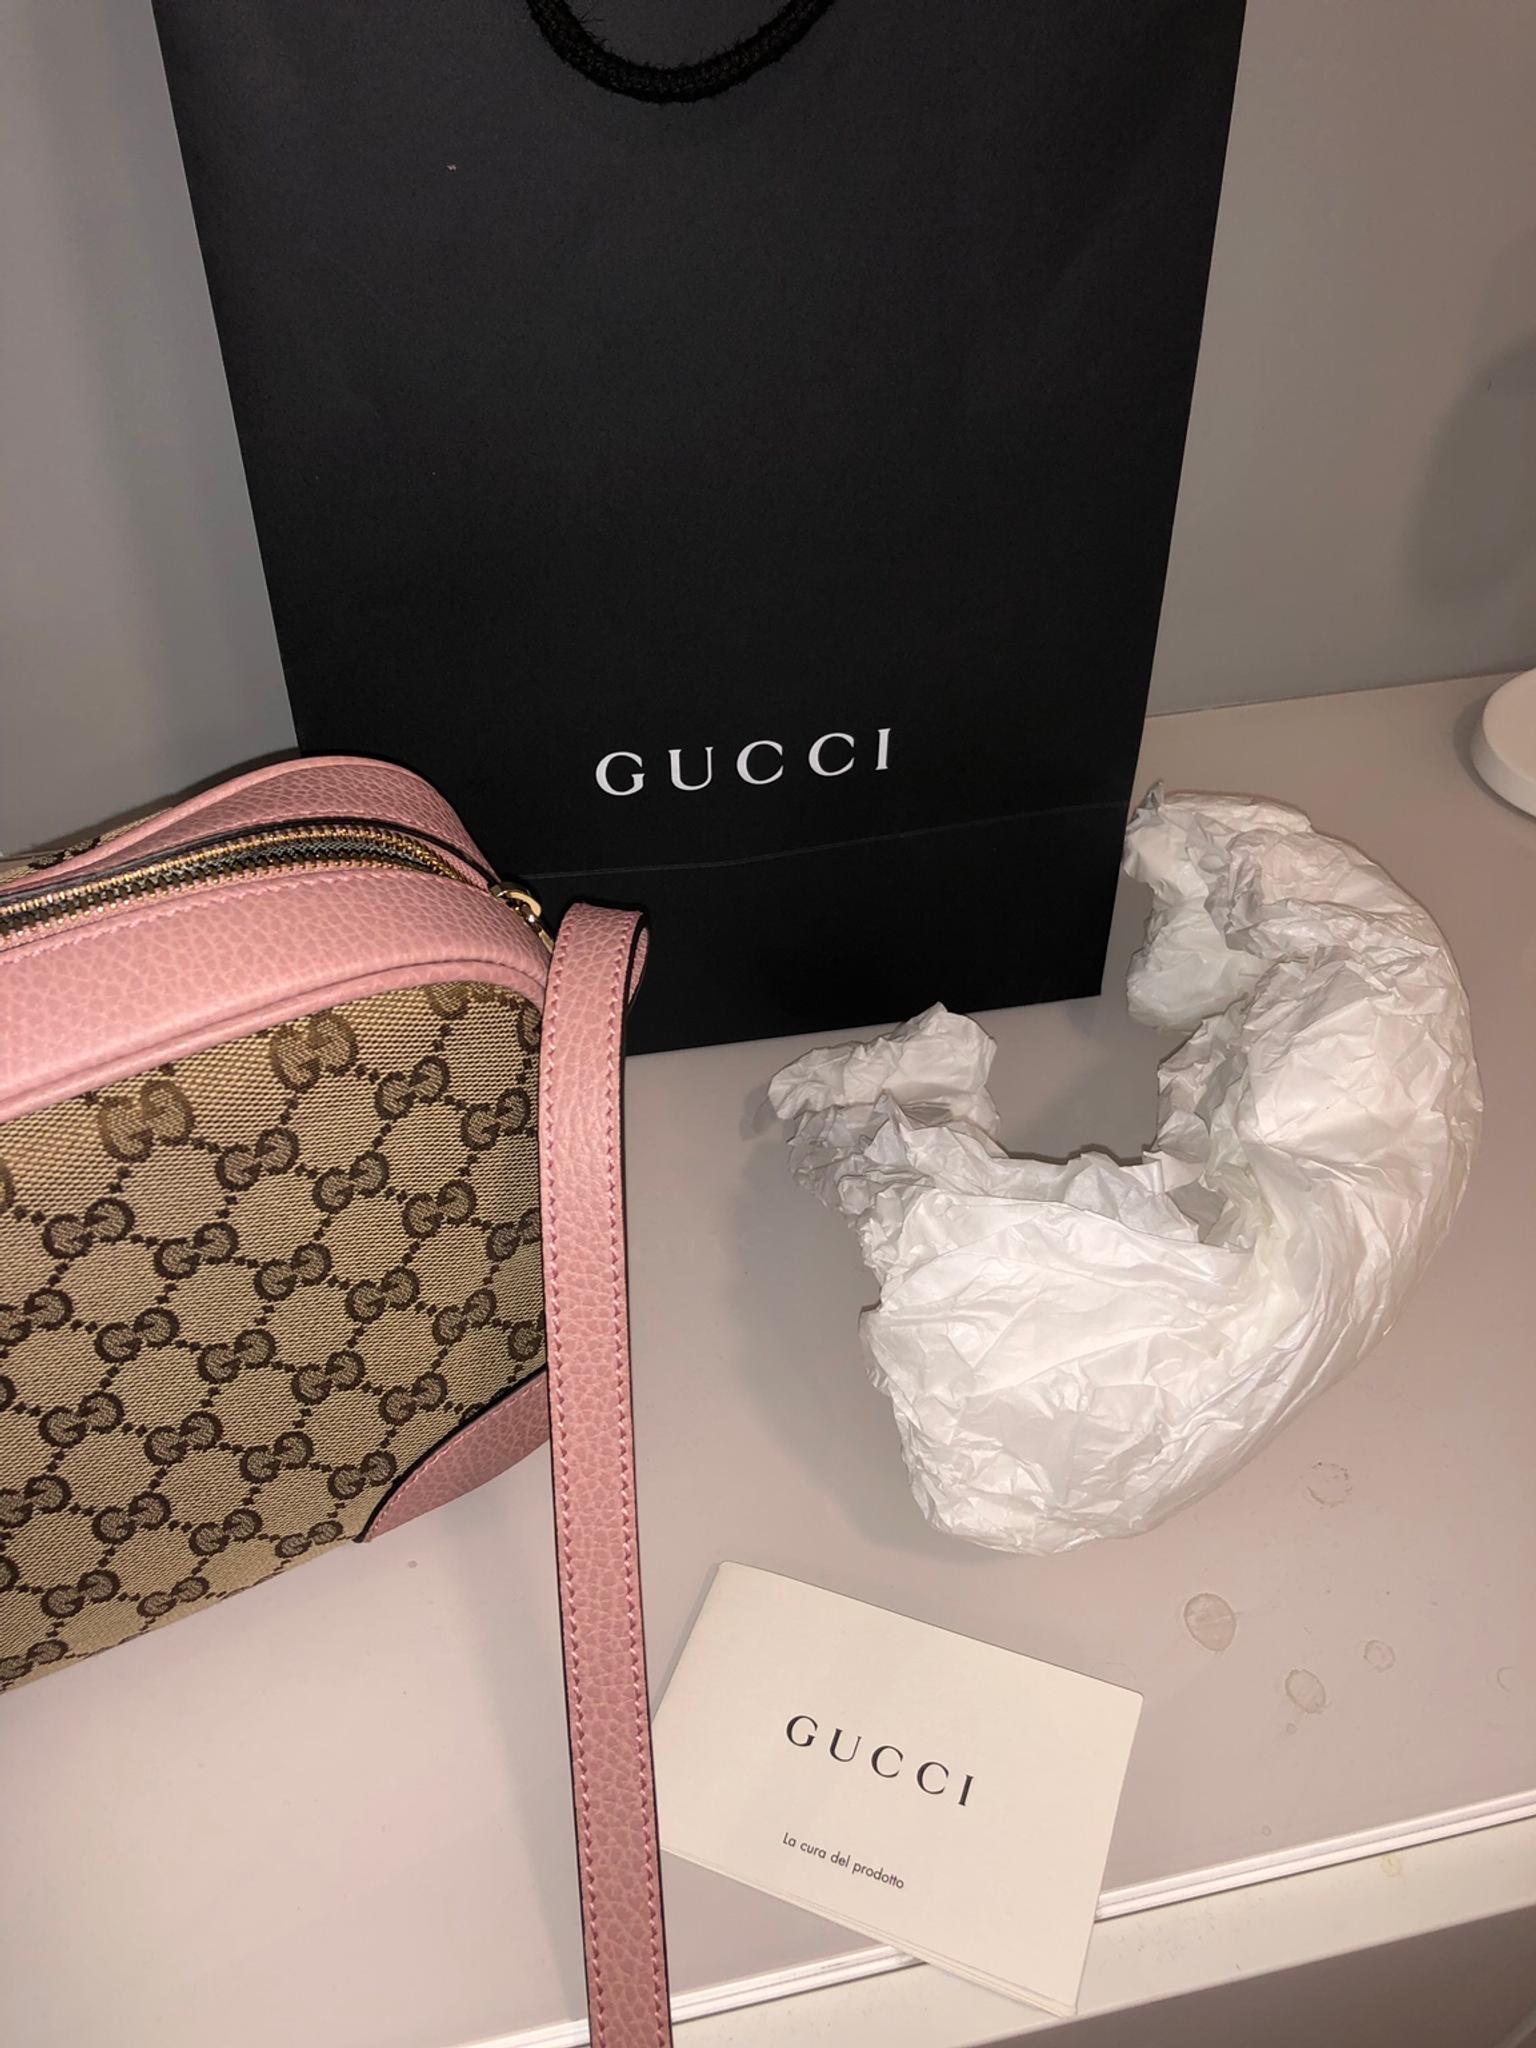 gucci bags in bicester village